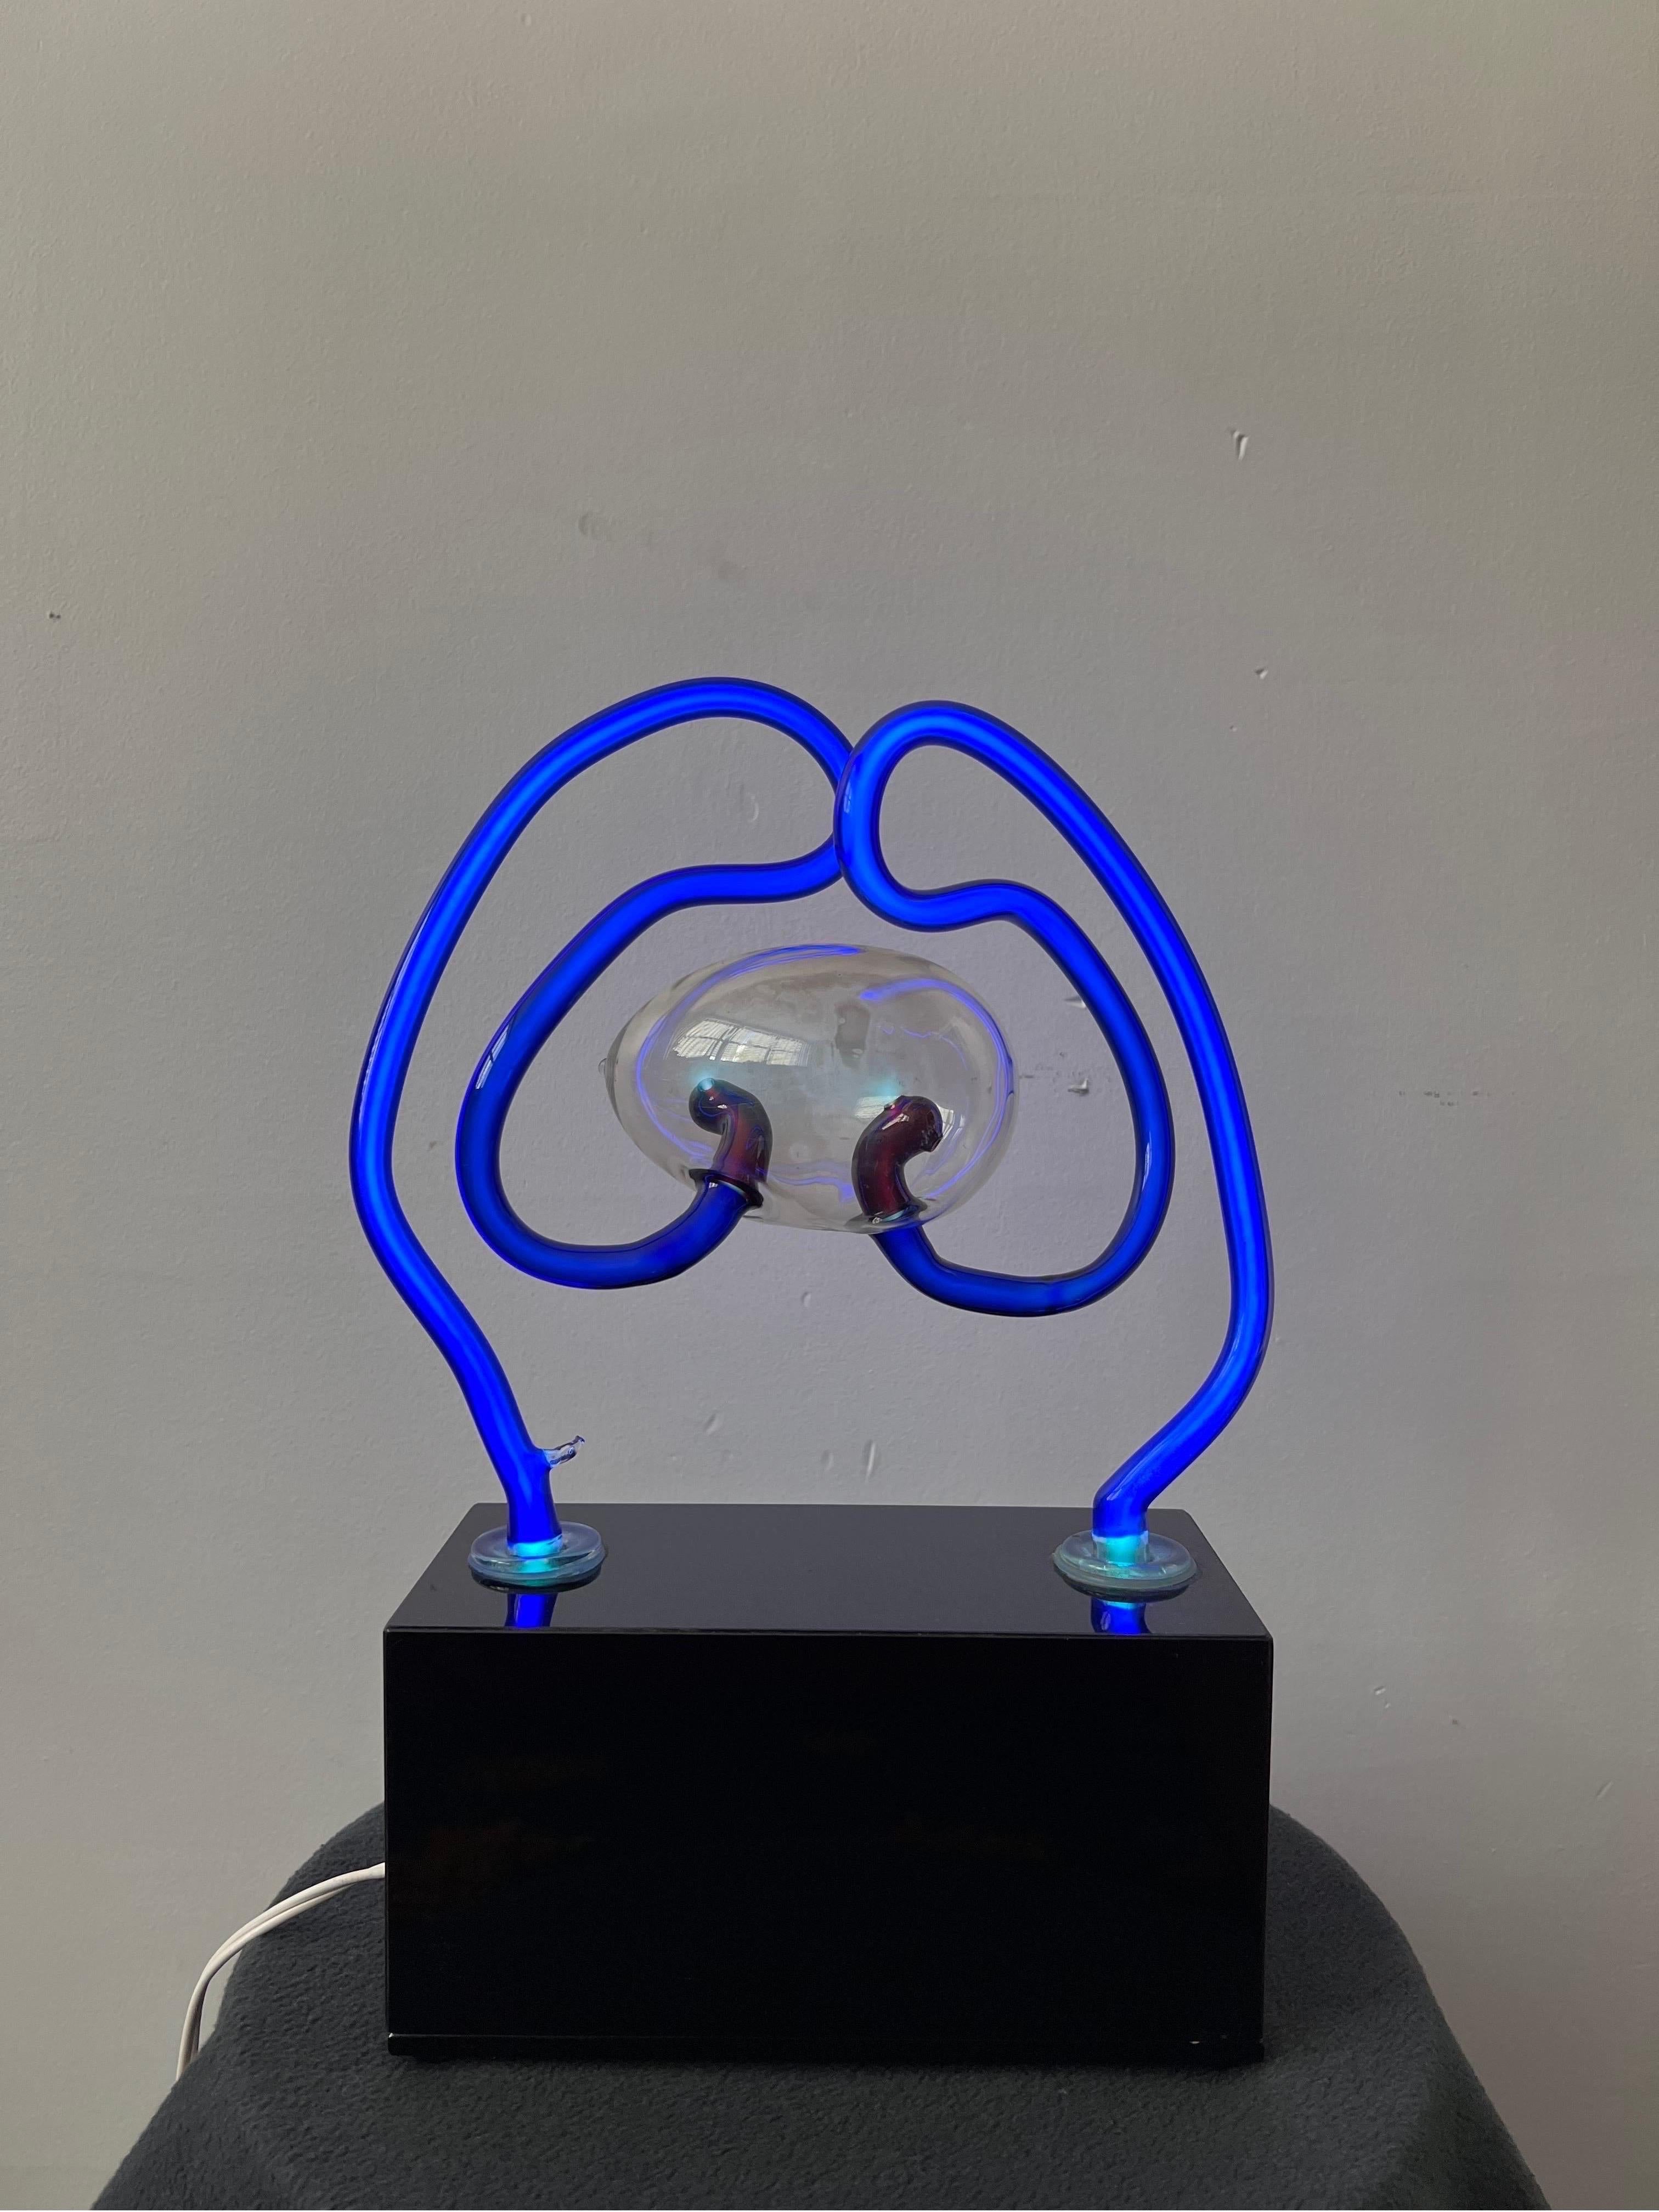 Artisan blown glass neon lamp sculpture on black acrylic base by David Grant Maul, 1983. Singed and dated.